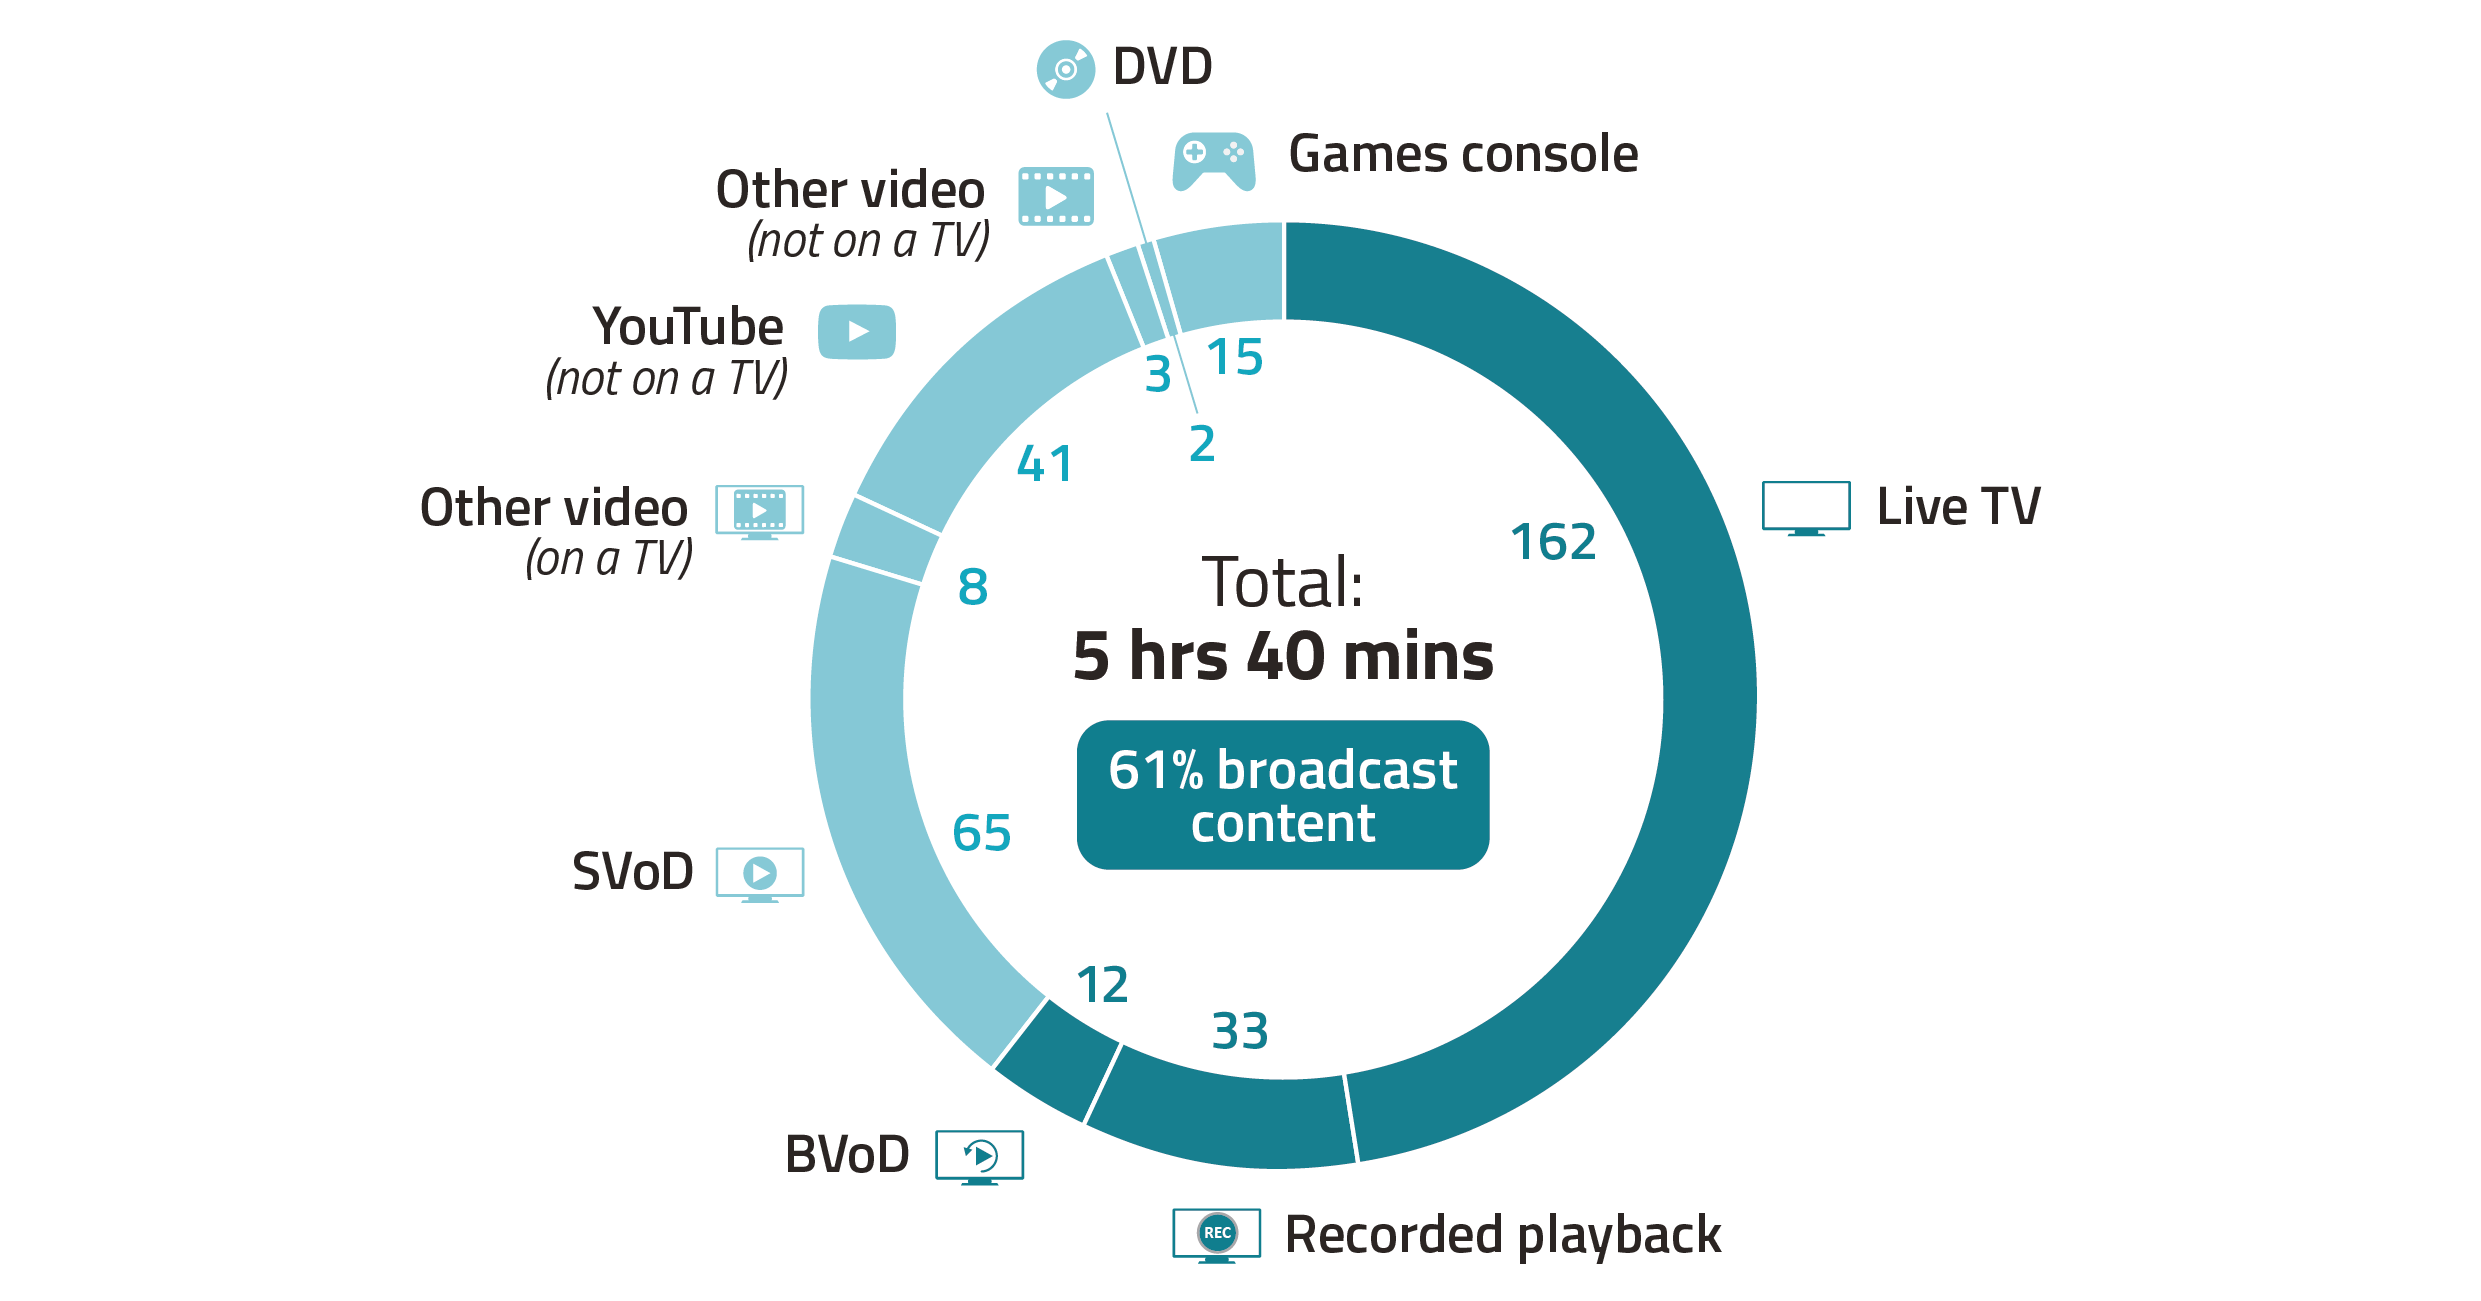 Image shows a doughnut chart showing the average minutes of viewing spent  per person per day across different platforms in 2020. The total viewing per person per day across 2020 was 5 hours and 40 minutes of which the majority (162 minutes) was spent watching live TV.